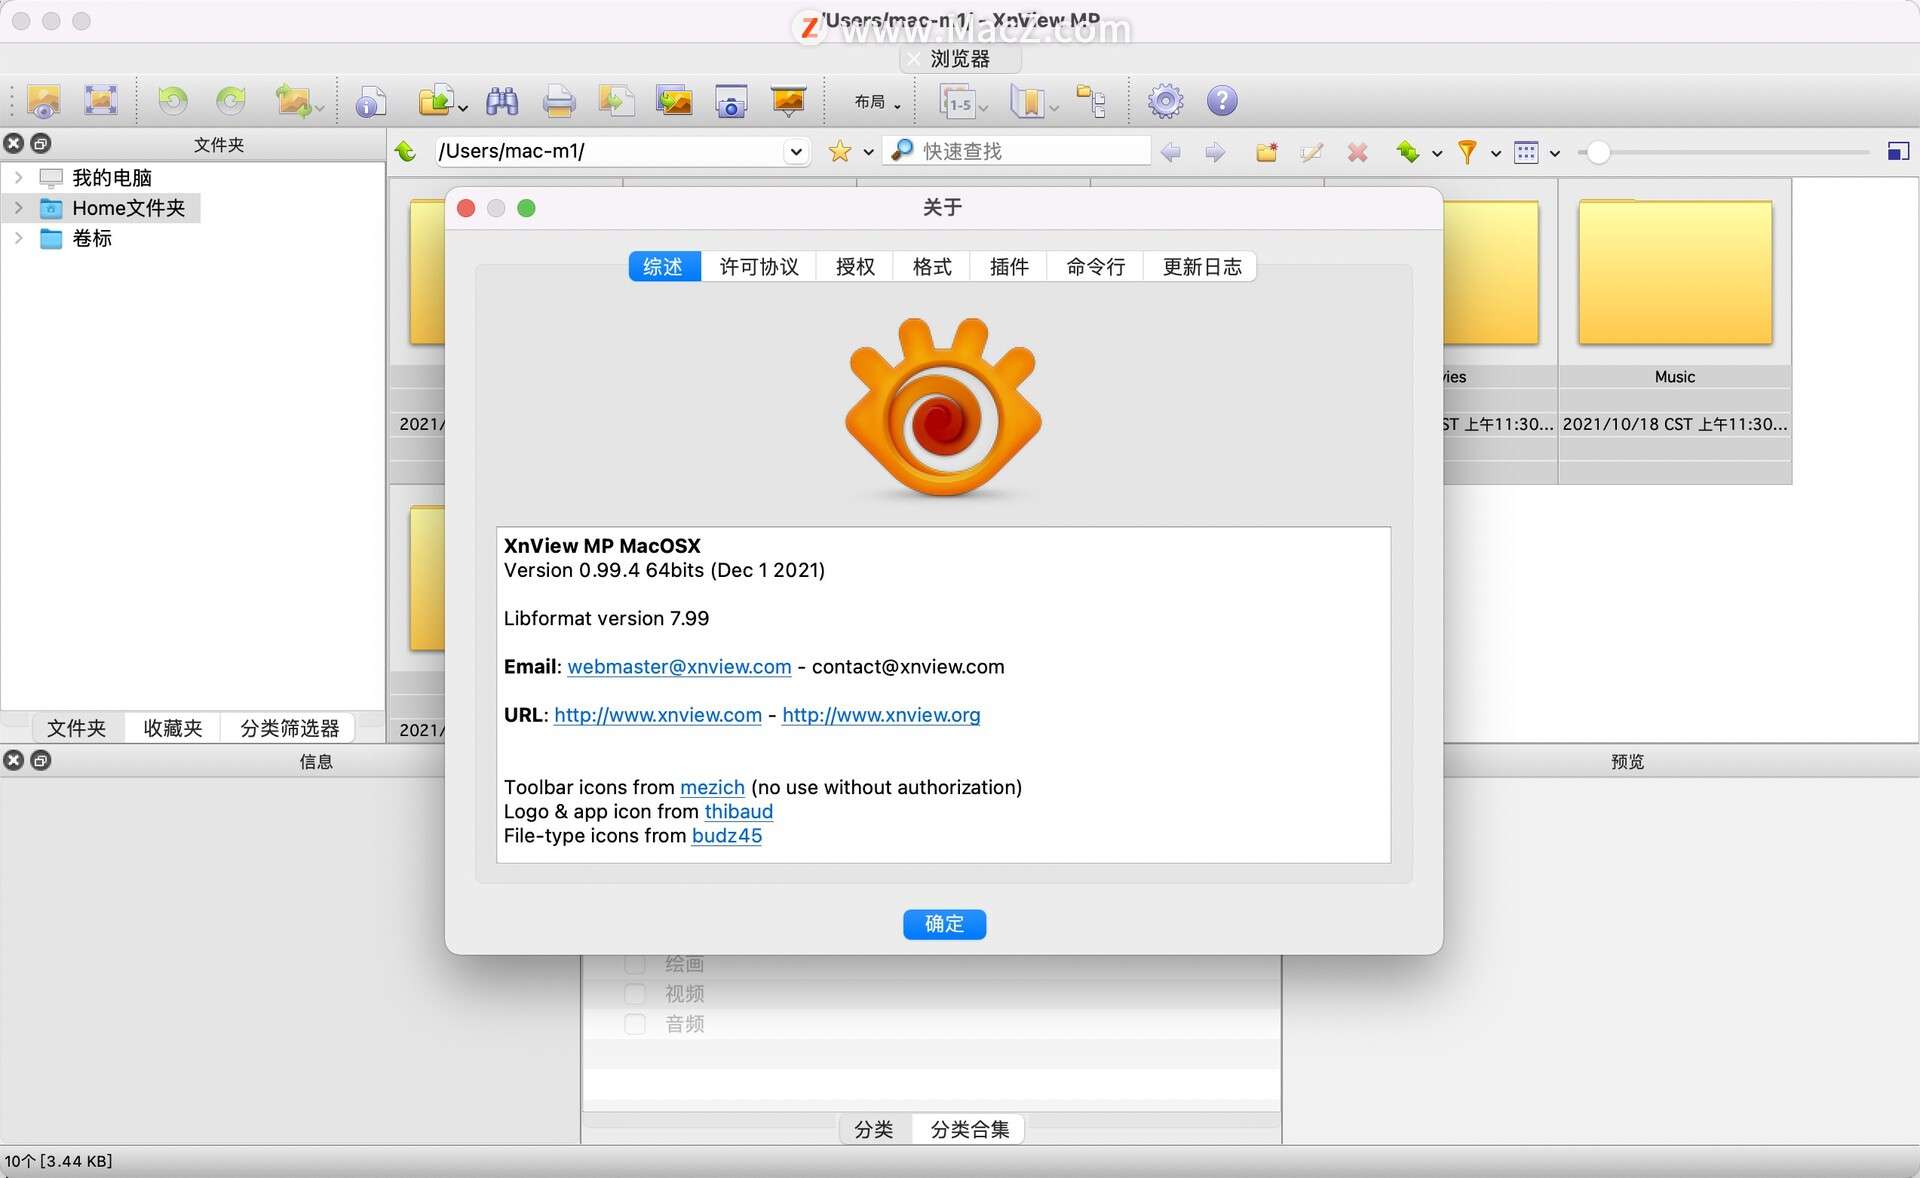 PictureView下载-PictureView for Mac(MacOS 图片浏览应用)- Mac下载